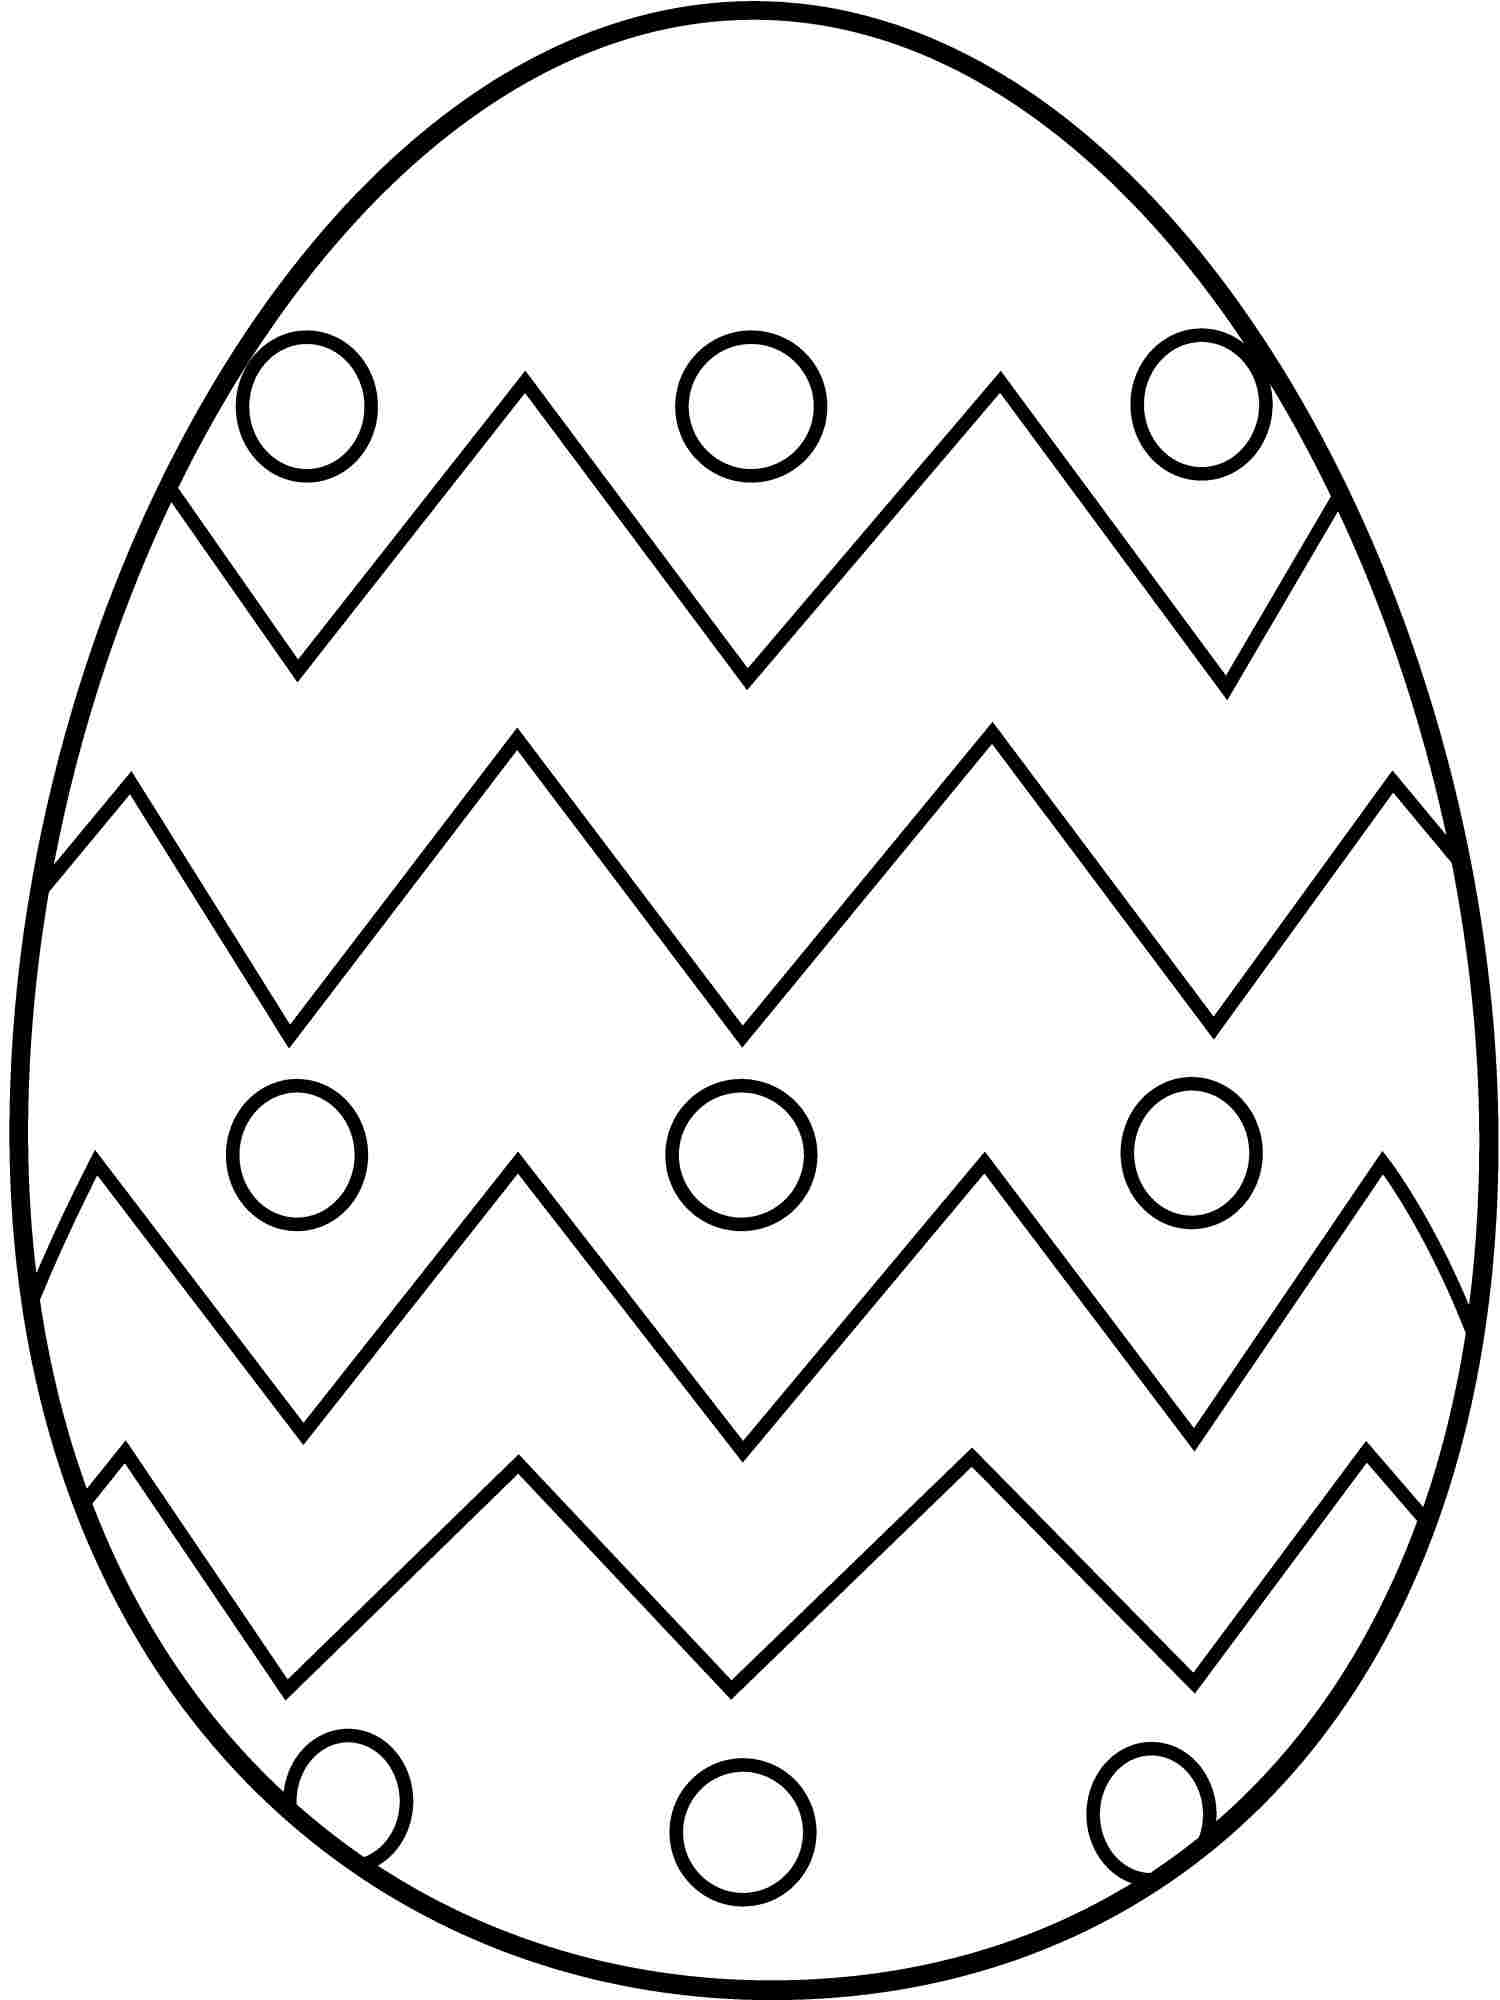 large-easter-egg-coloring-pages-at-getcolorings-free-printable-colorings-pages-to-print